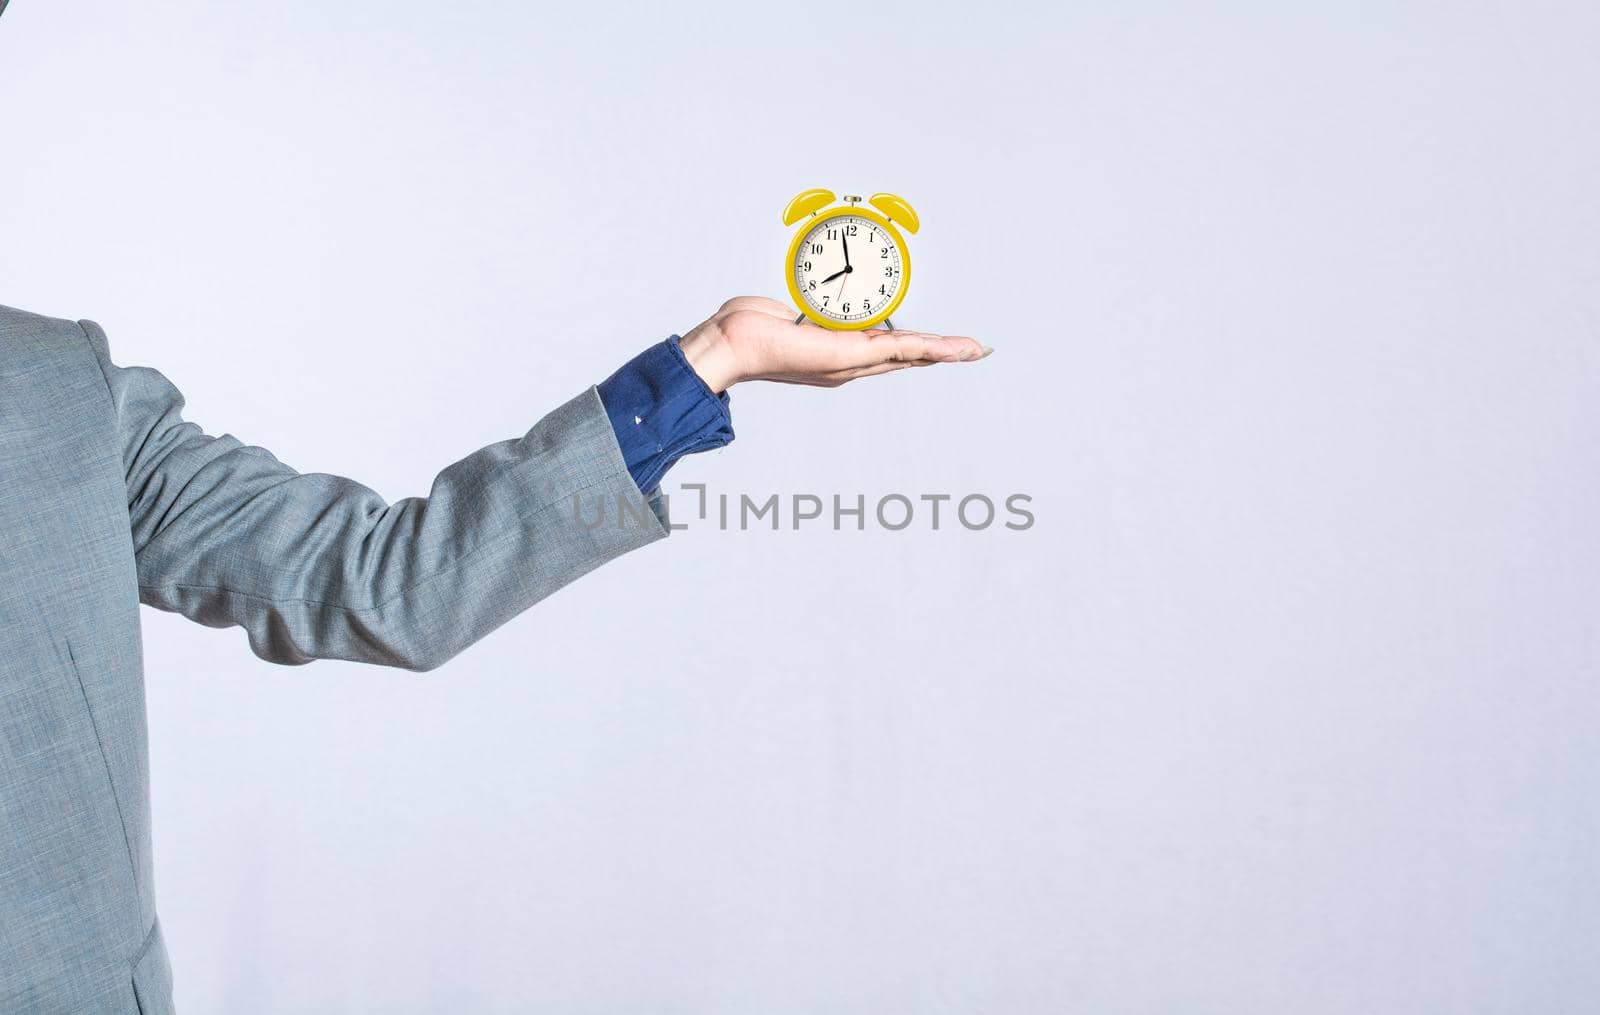 A hand holding a table clock on isolated background, close up of a hand holding an alarm clock, businessman hand holding clock isolated